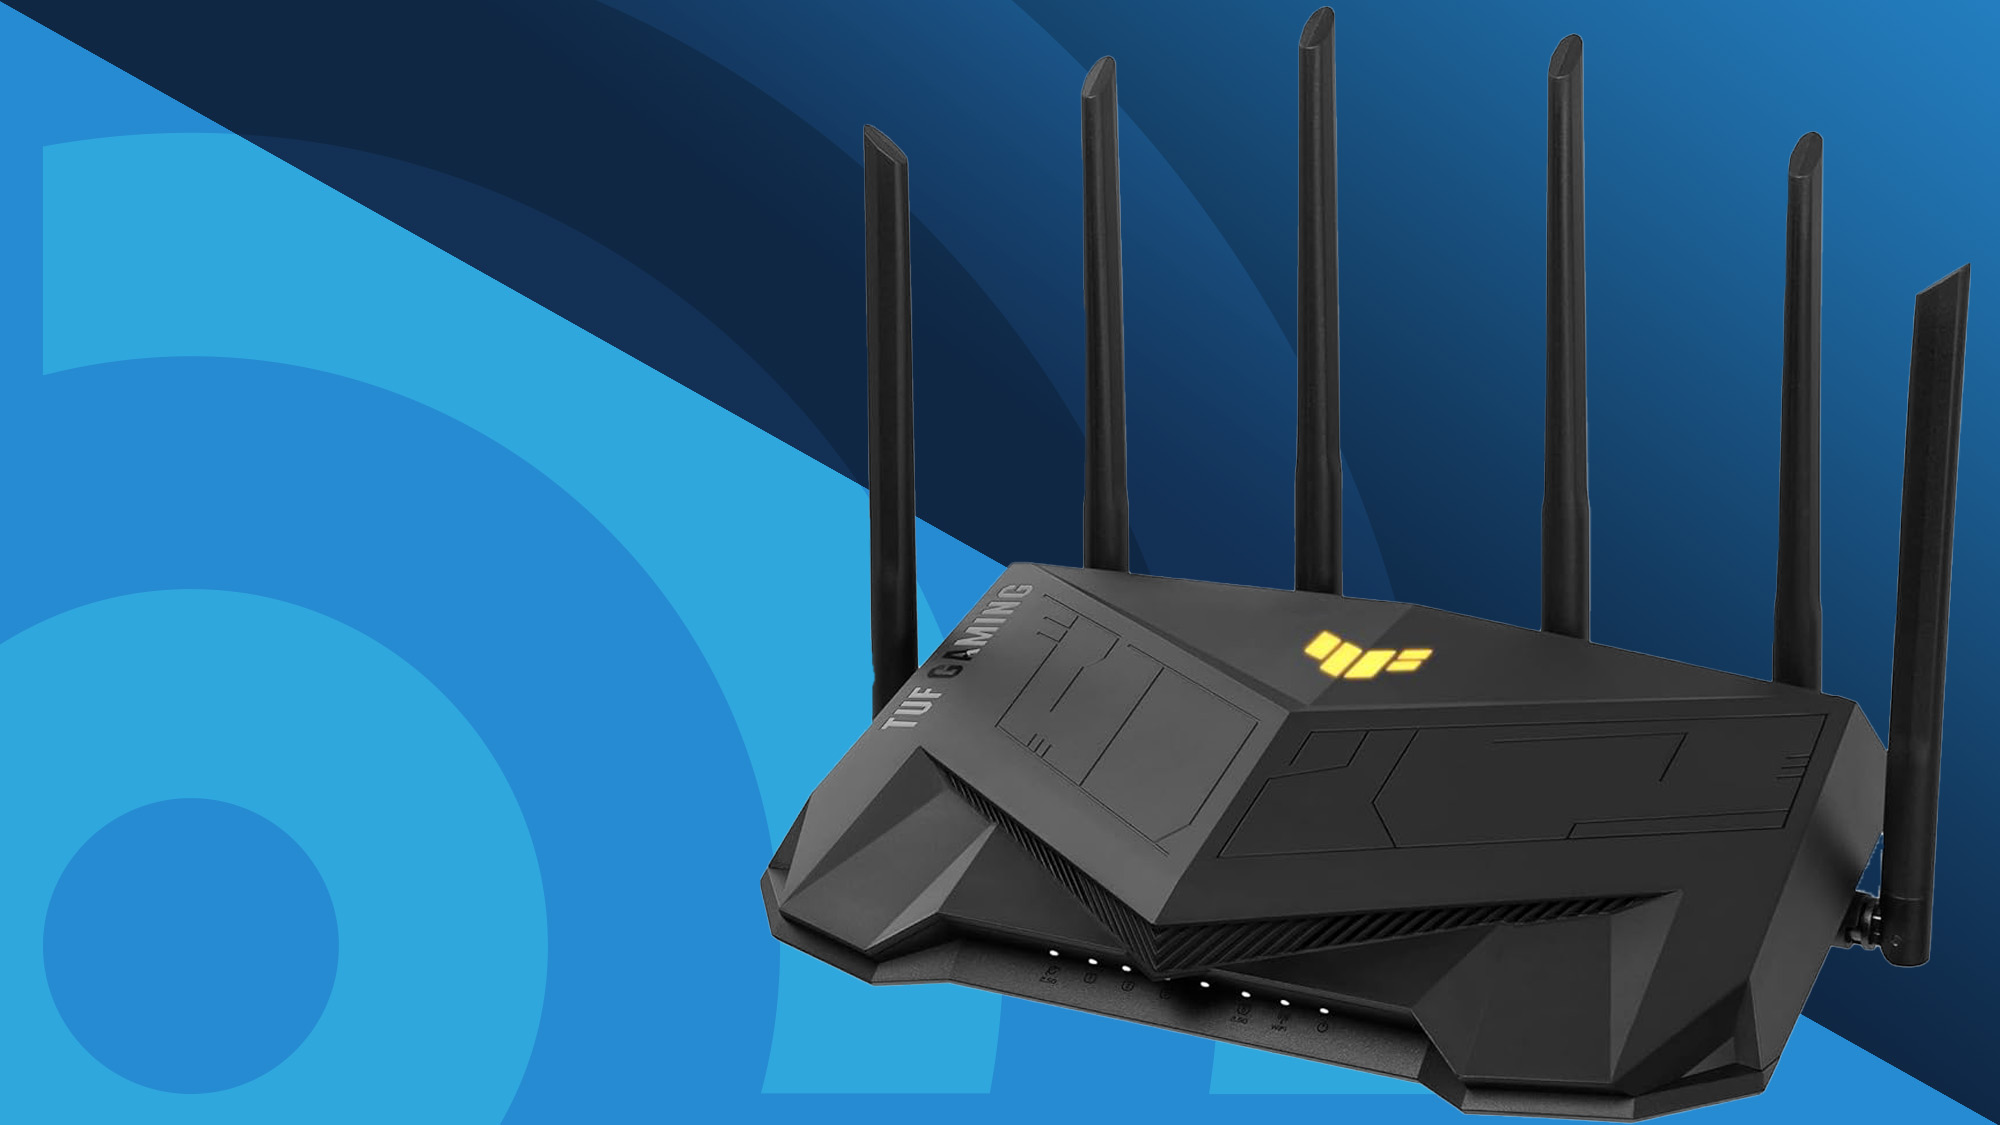 WiFi Routers - All series｜ASUS Global